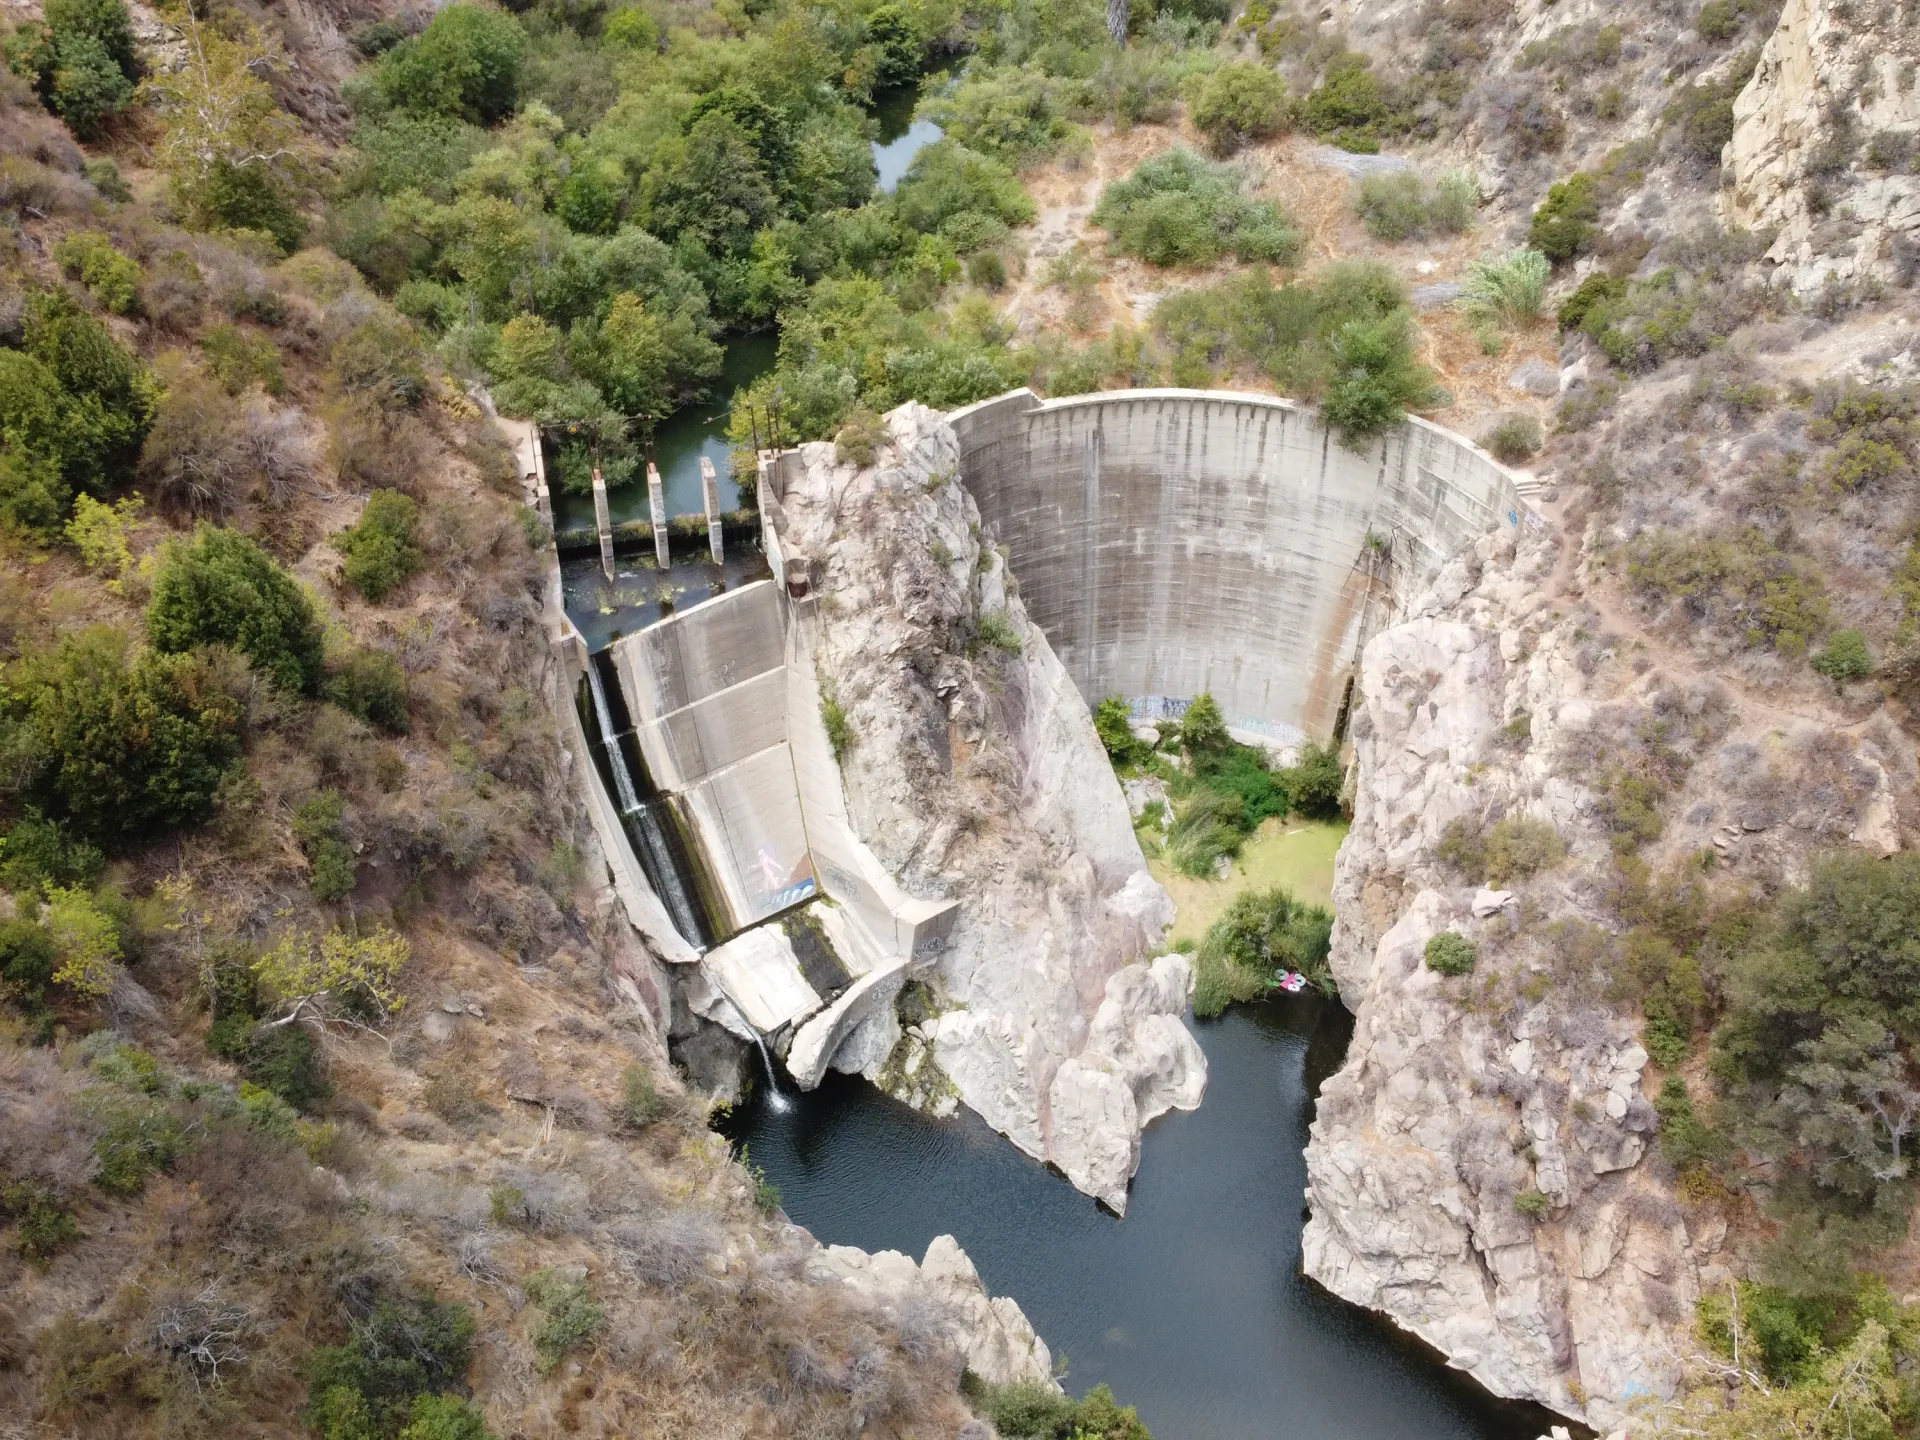 Working with conservation nonprofit California Trout, California State Parks will remove Rindge Dam in Malibu Creek State Park by 2030. This project will restore access to critical habitat for endangered Southern steelhead trout. Photo courtesy of California Trout.